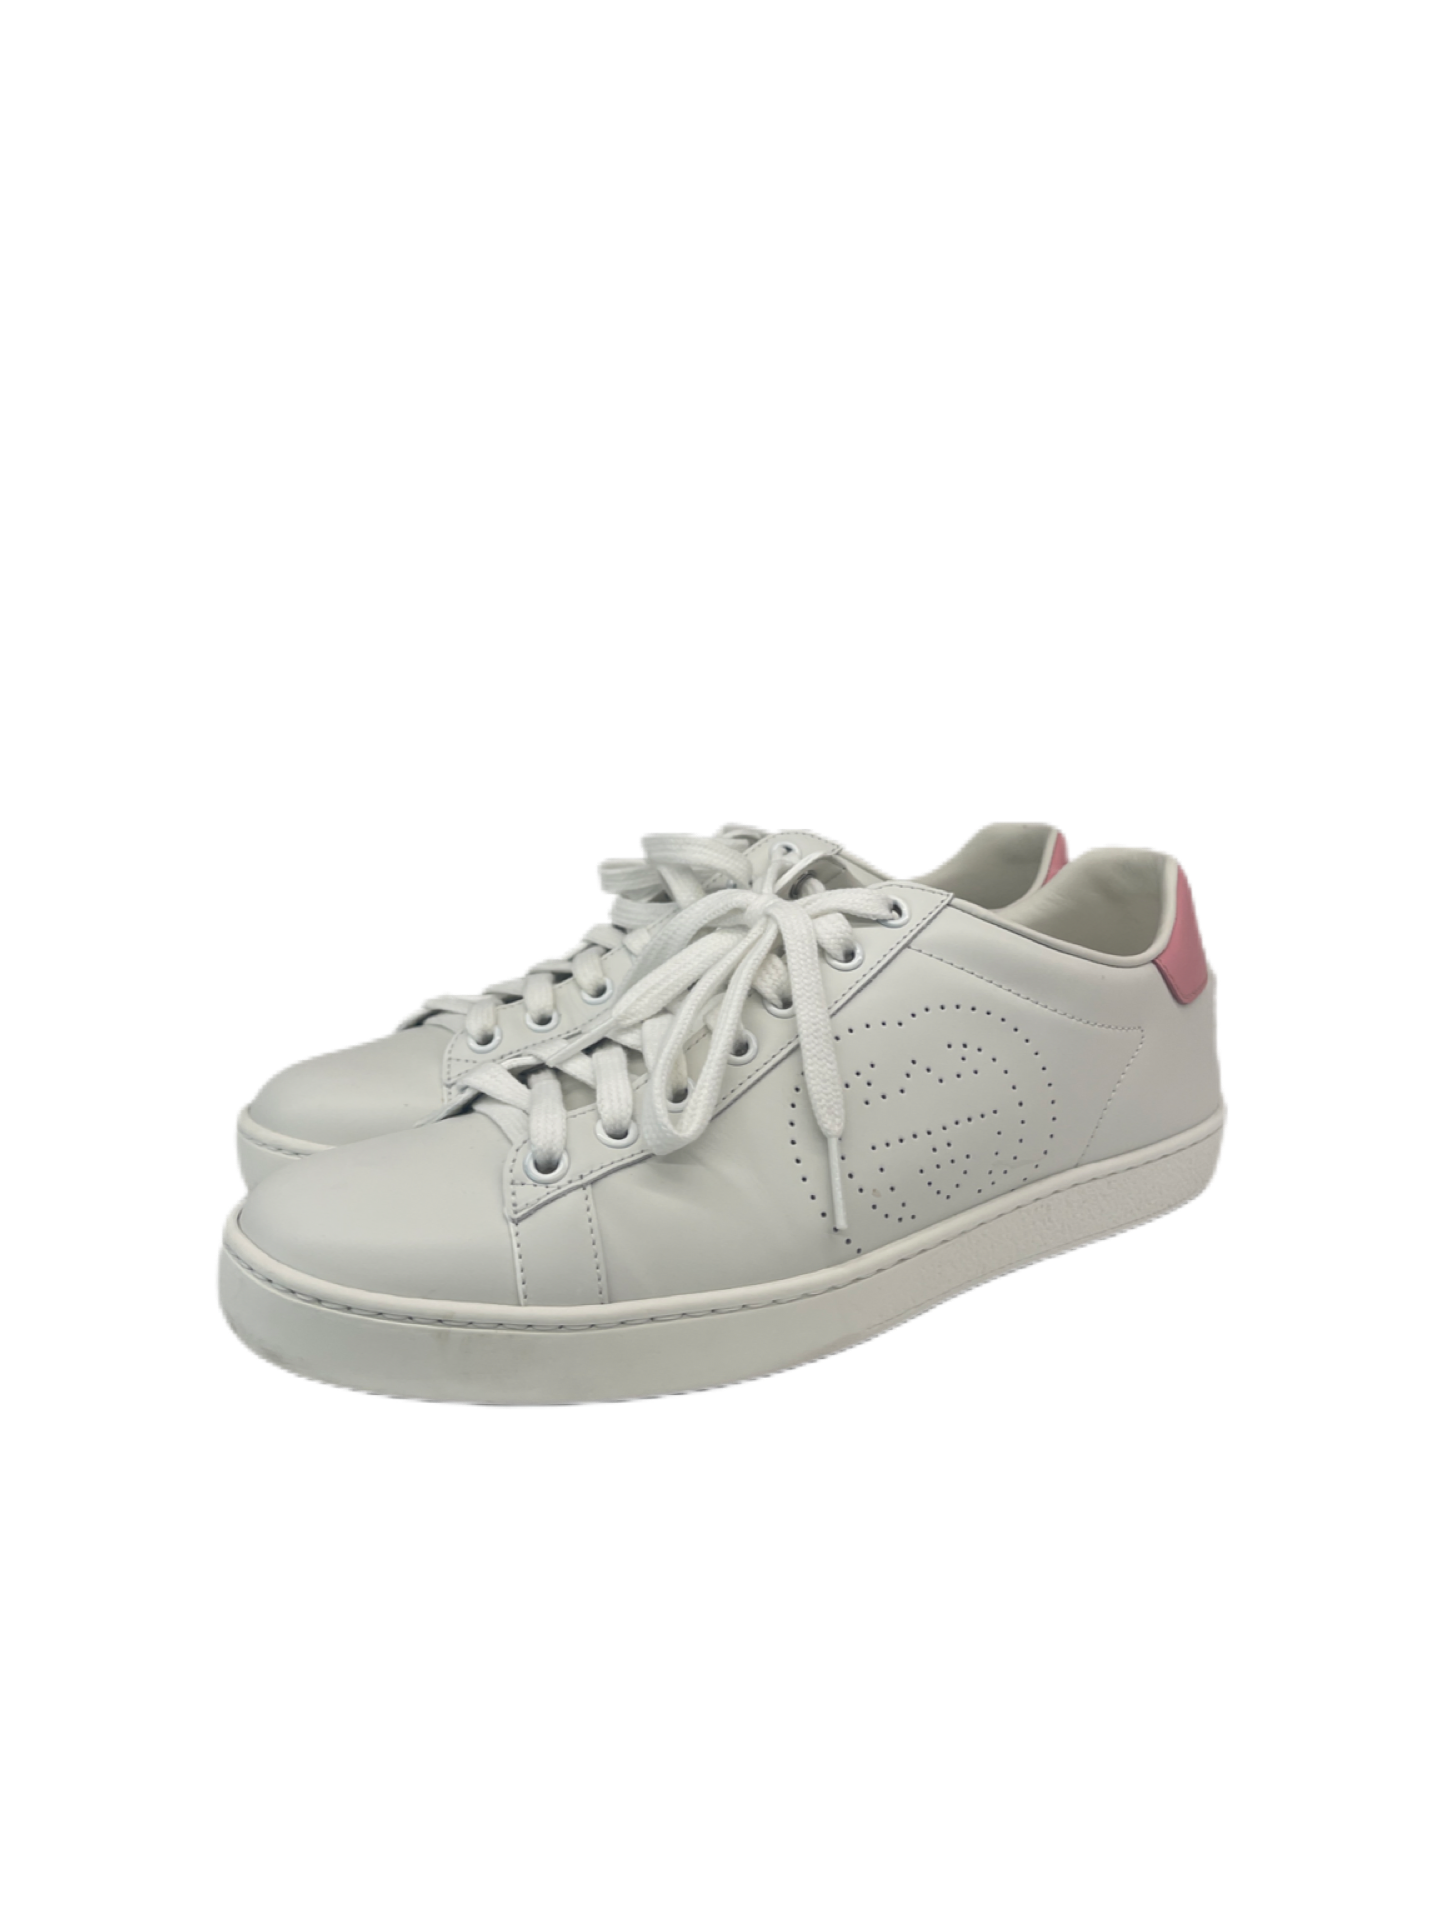 Gucci White Sneakers with Perforated Logo. Size: 38.5